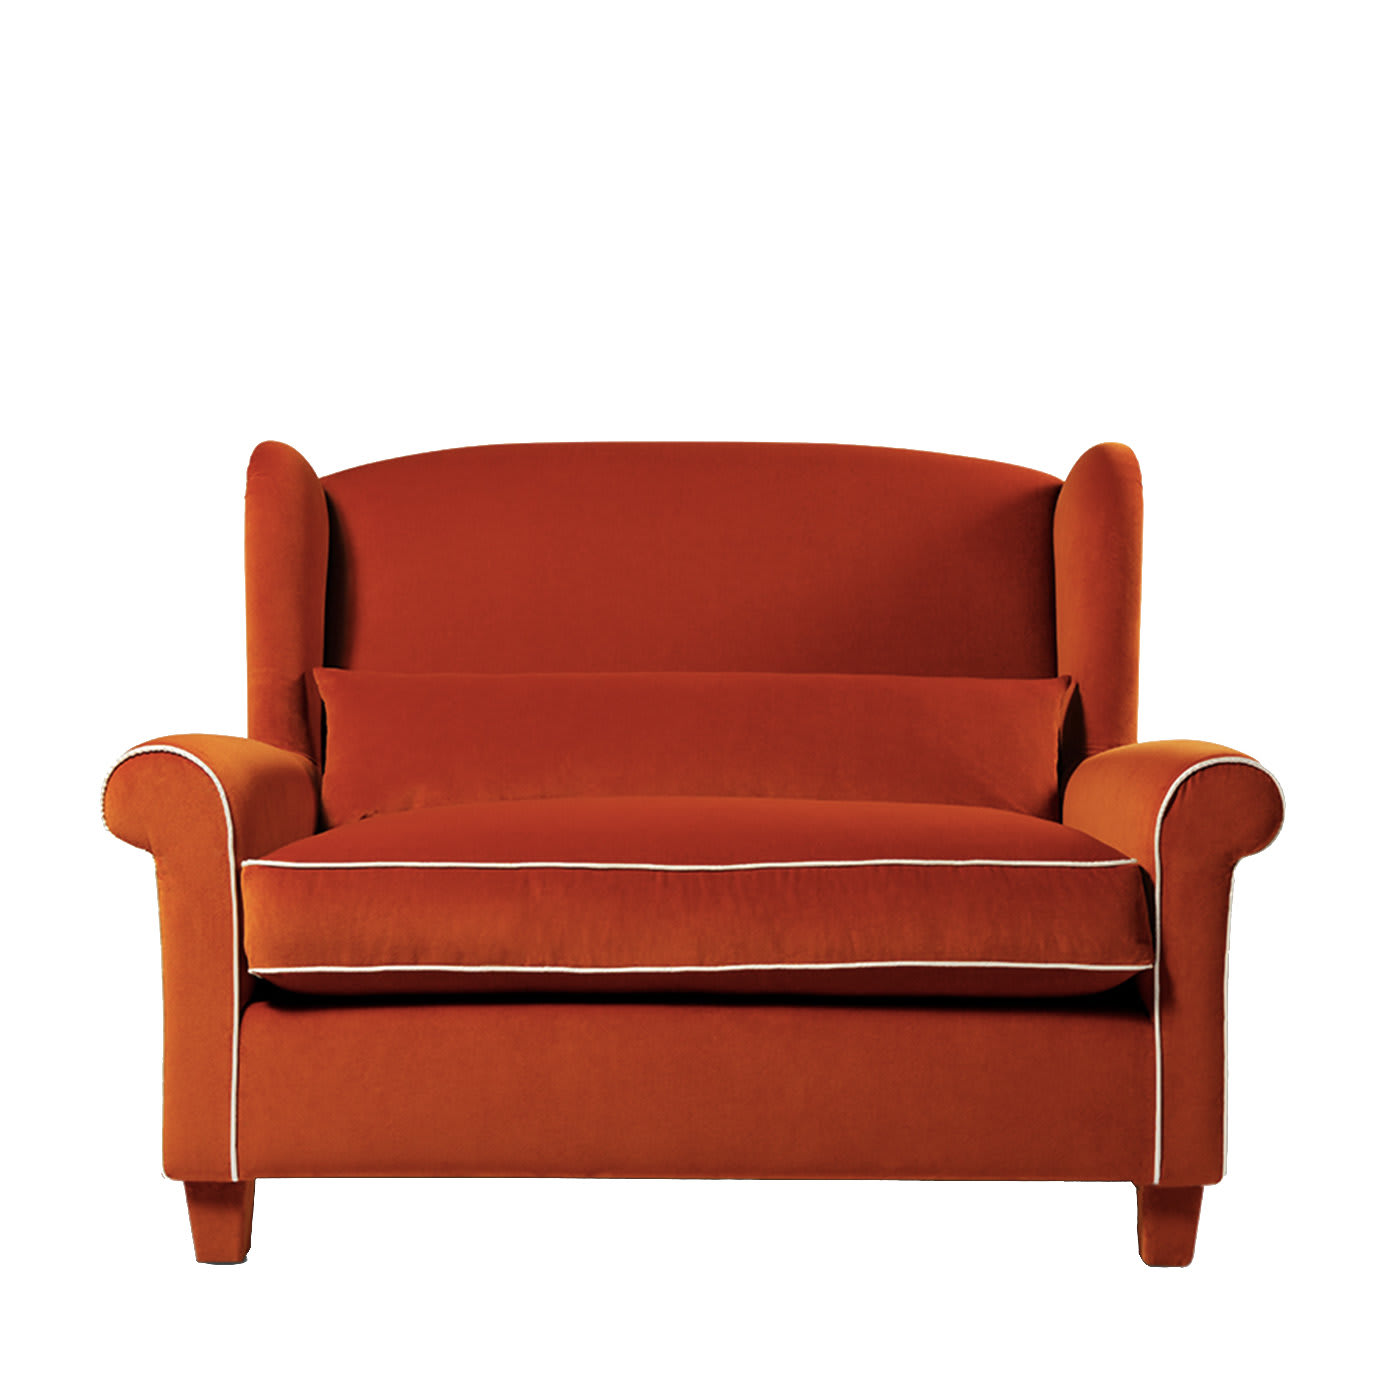 Alexander Loveseat by Gianni G. Pellini - Editions Milano